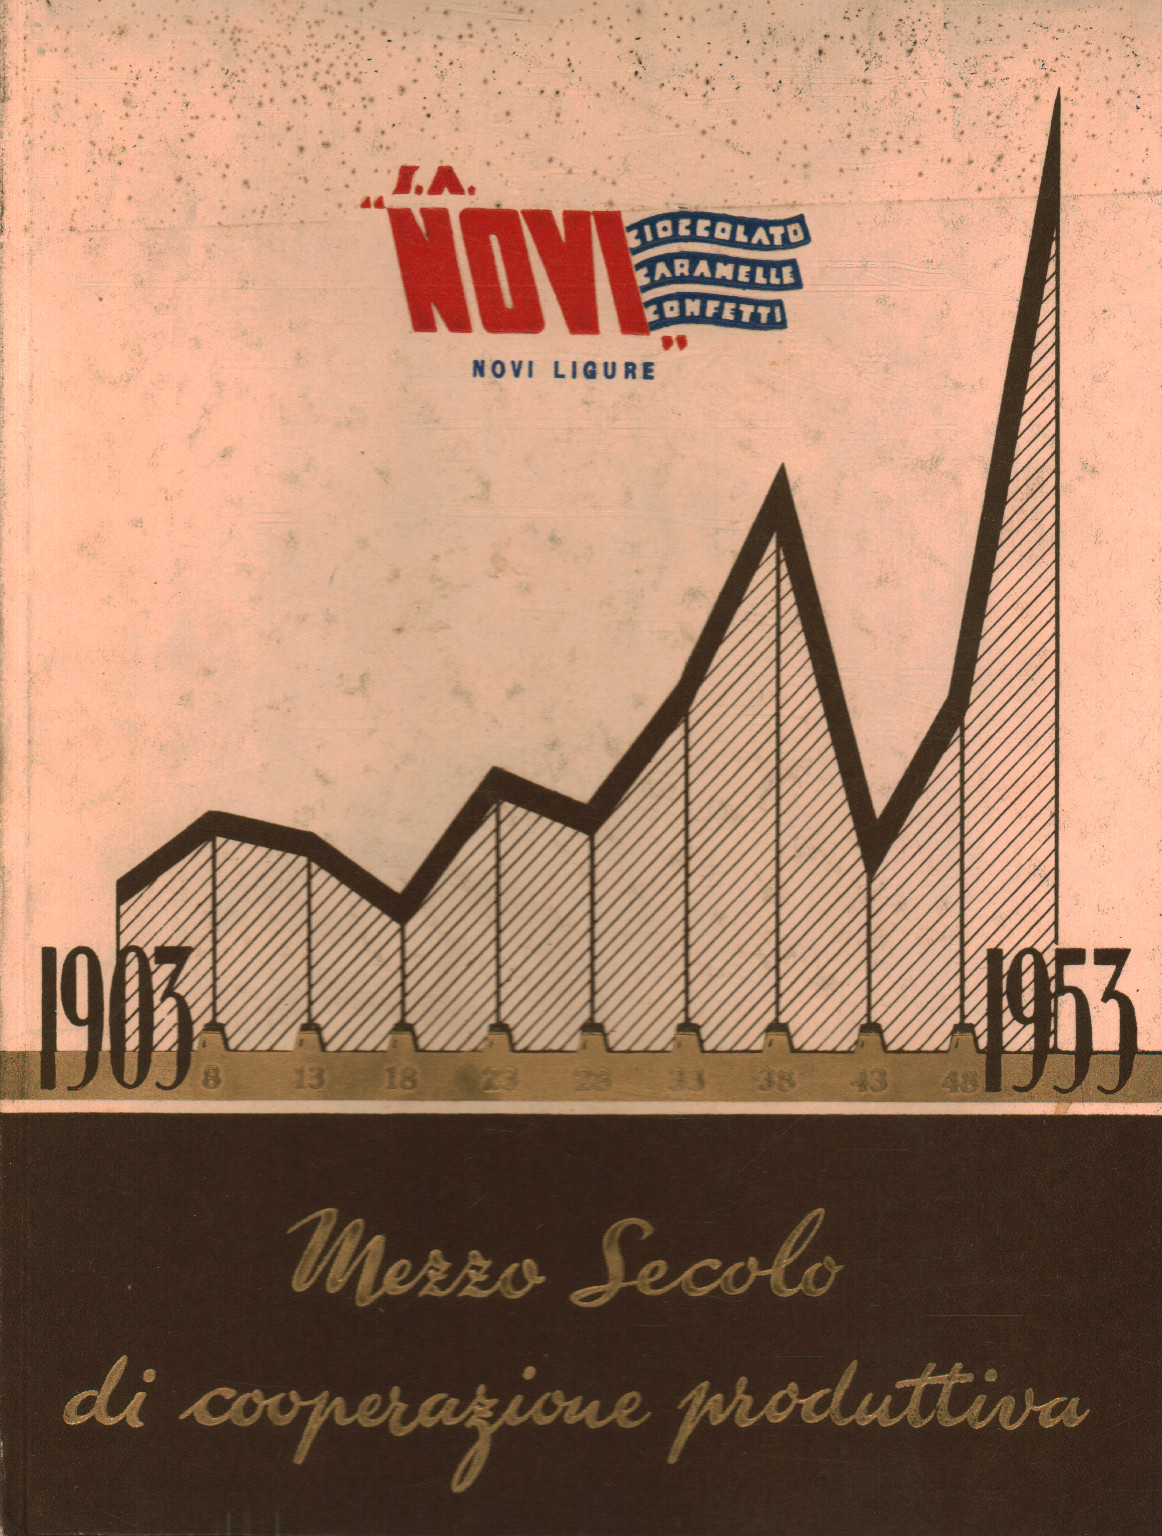 1903-1953 Half a century of productive co-operation, s.a.